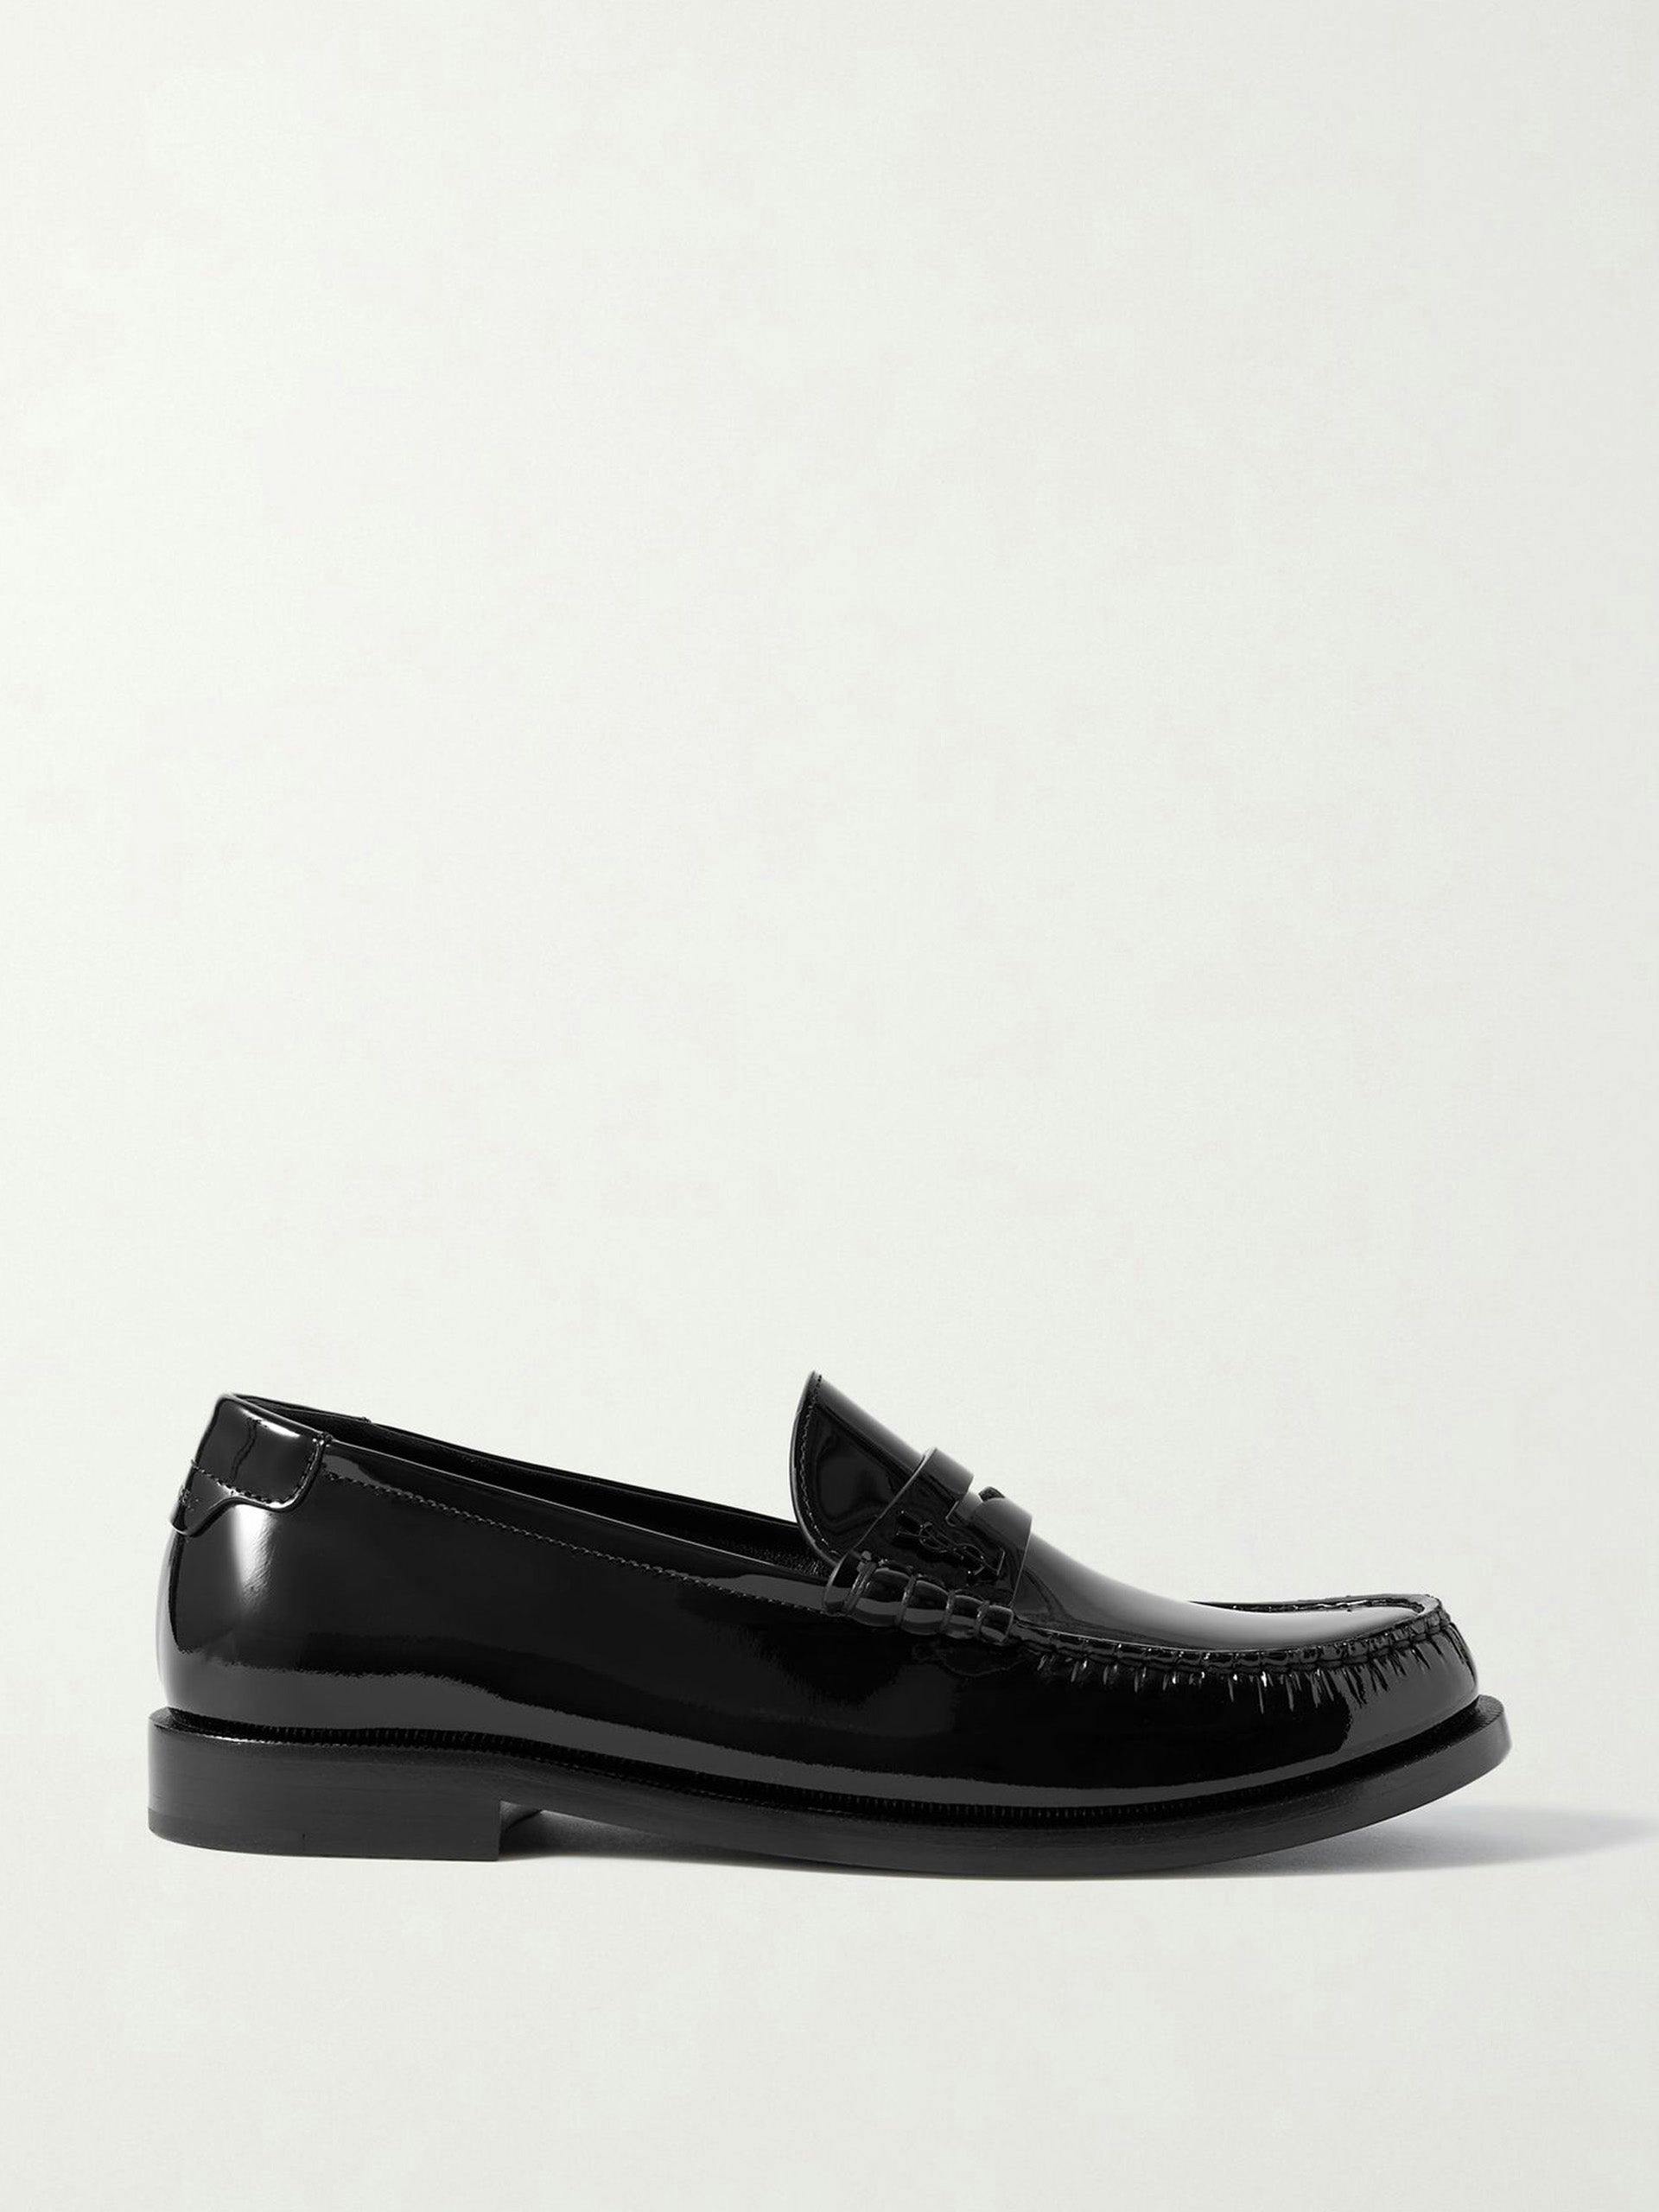 Black patent-leather loafers